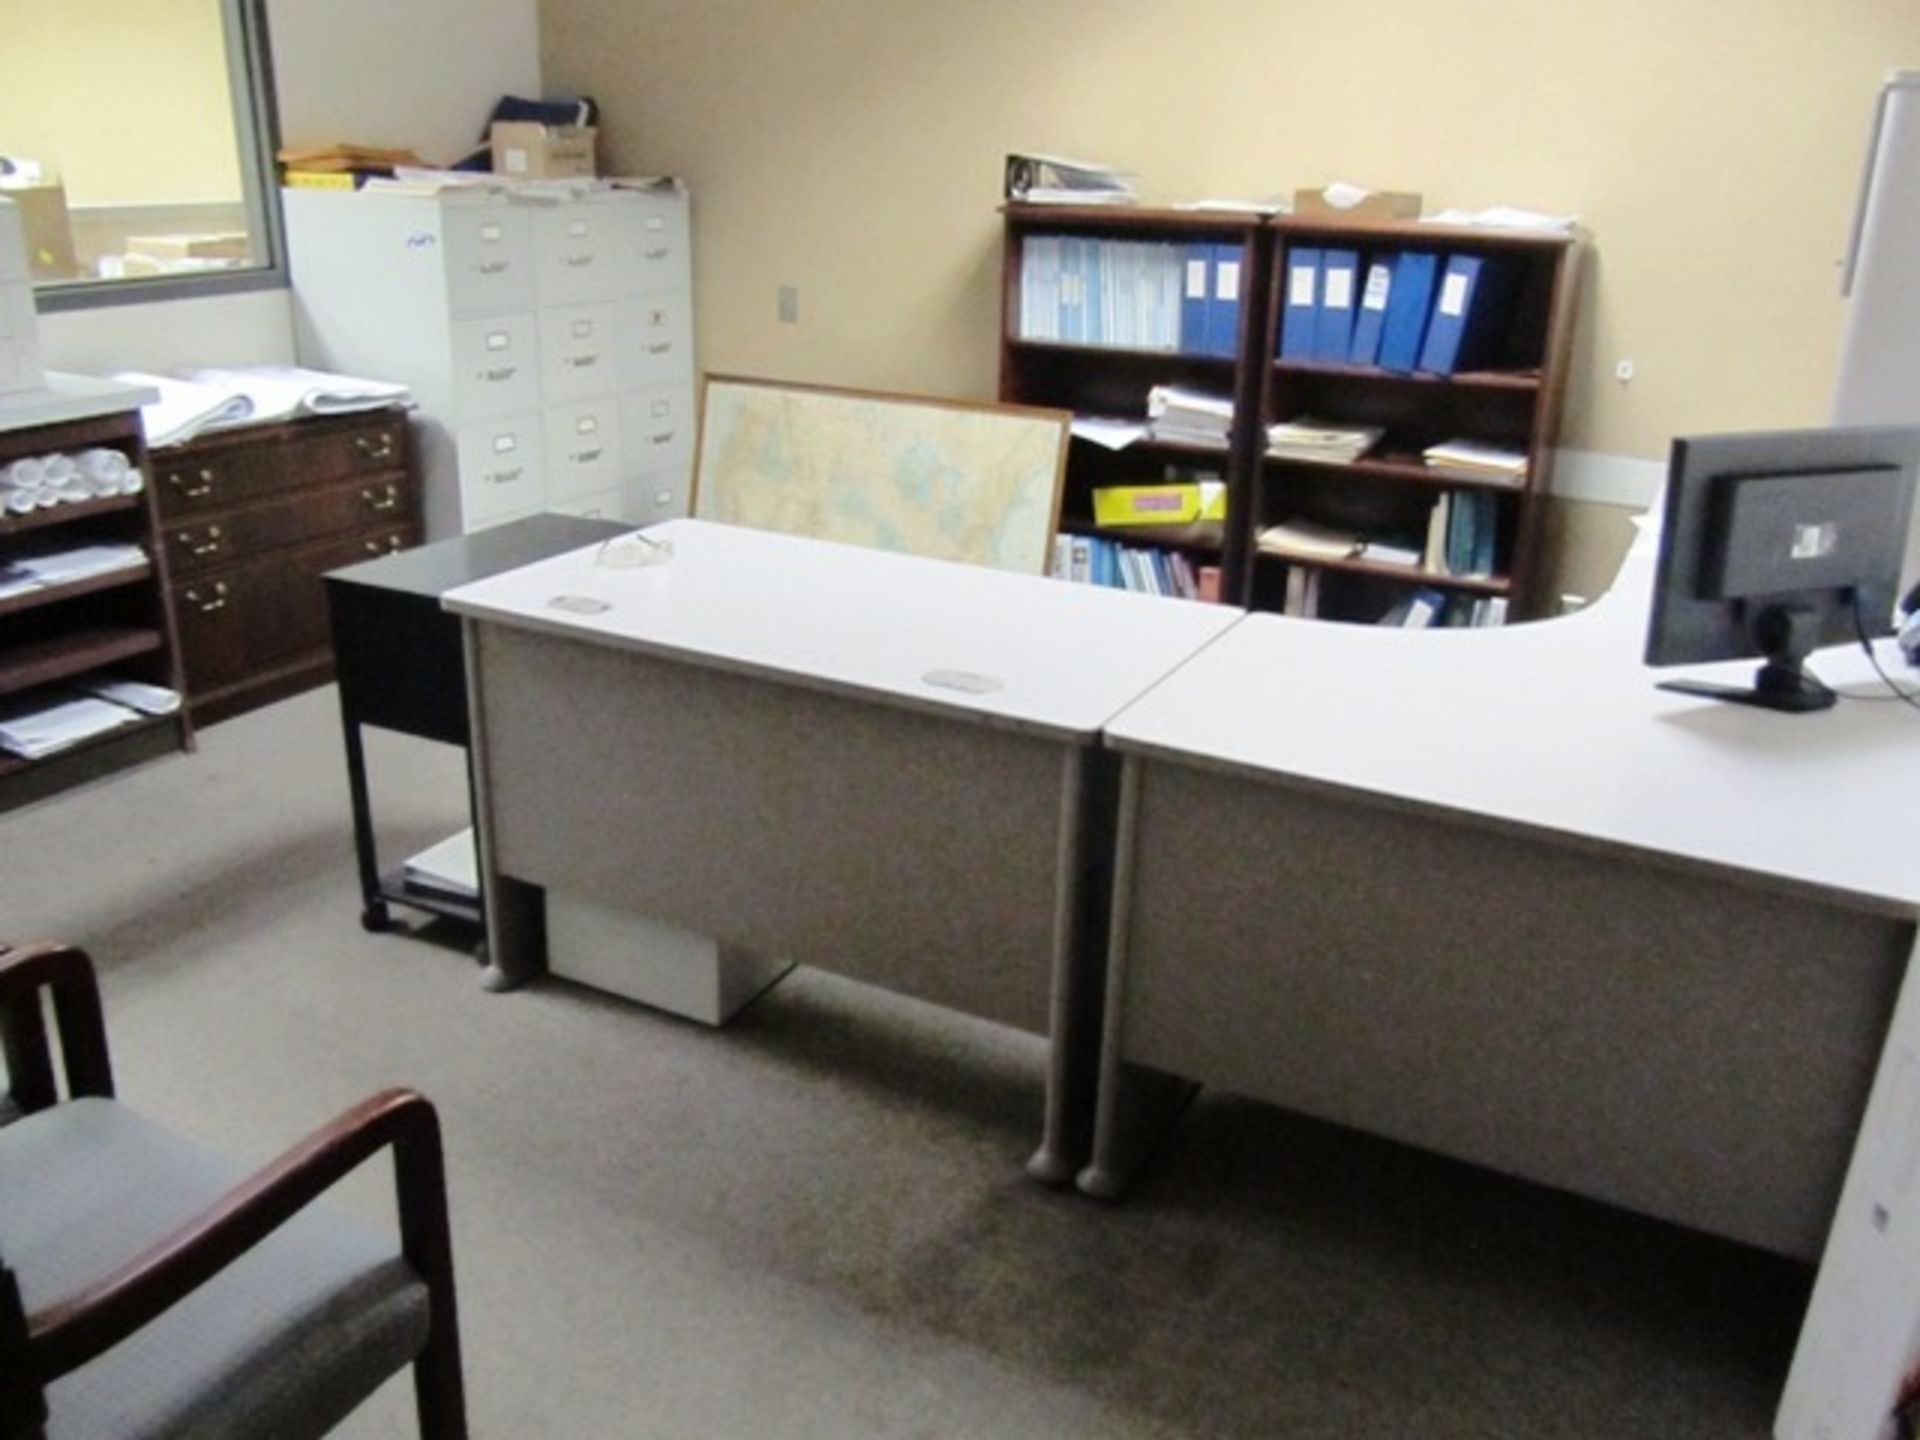 Contents of Office consisting of Desk, Chairs, Bookshelves, Filing Cabinets